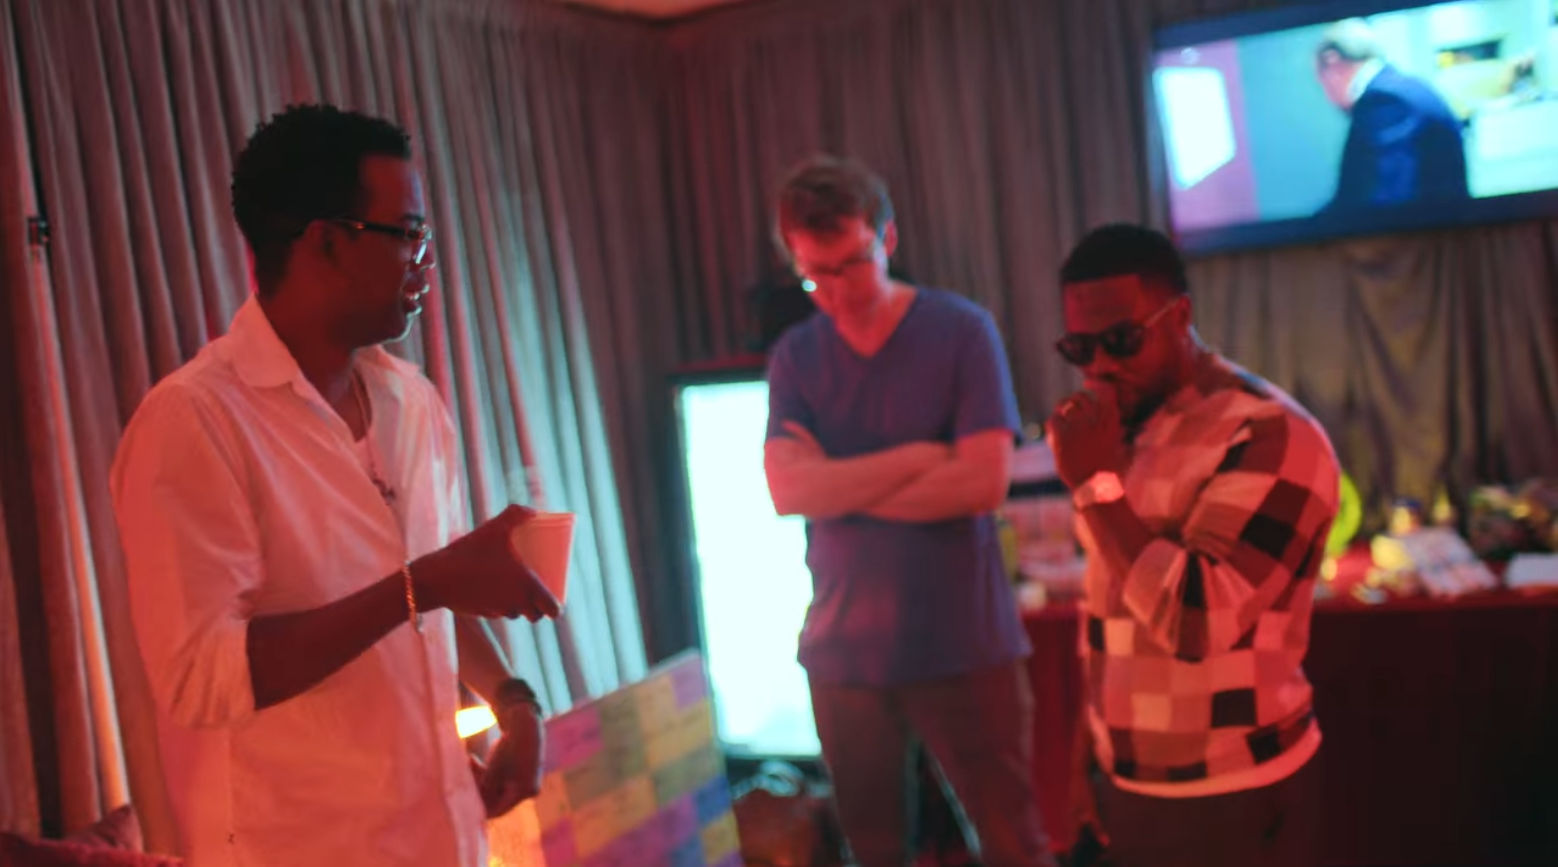 Chris Rock and Kevin Hart standing up in a green room. Behind them is a small board covered with rainbow colored slips of paper.